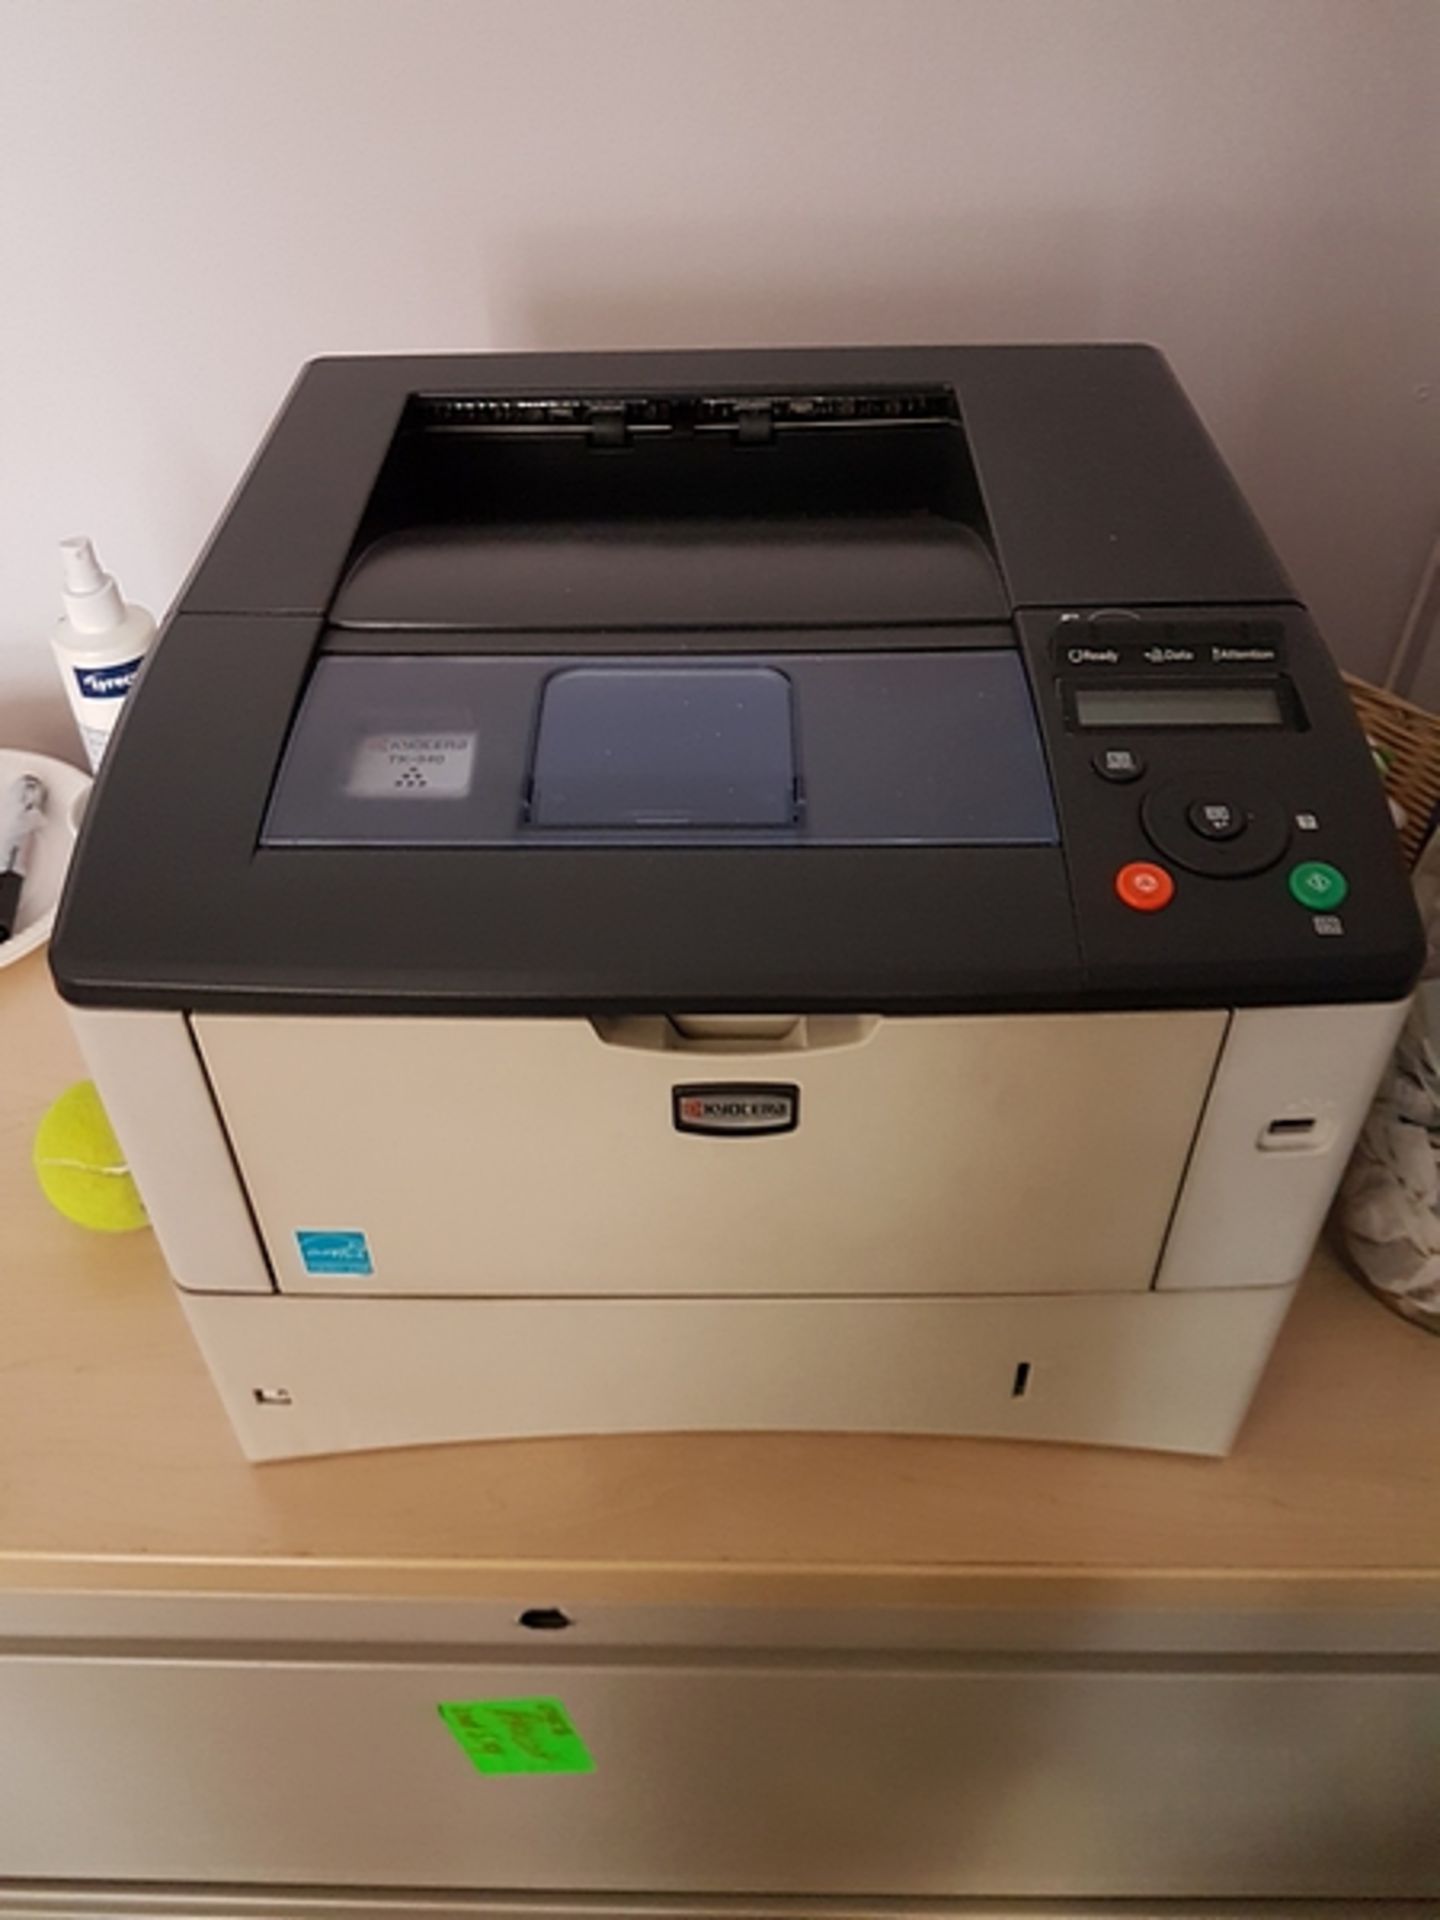 Ecosy FS2020D document printer up to 35 pages per minute in A4 with up to 1,200 dpi resolution